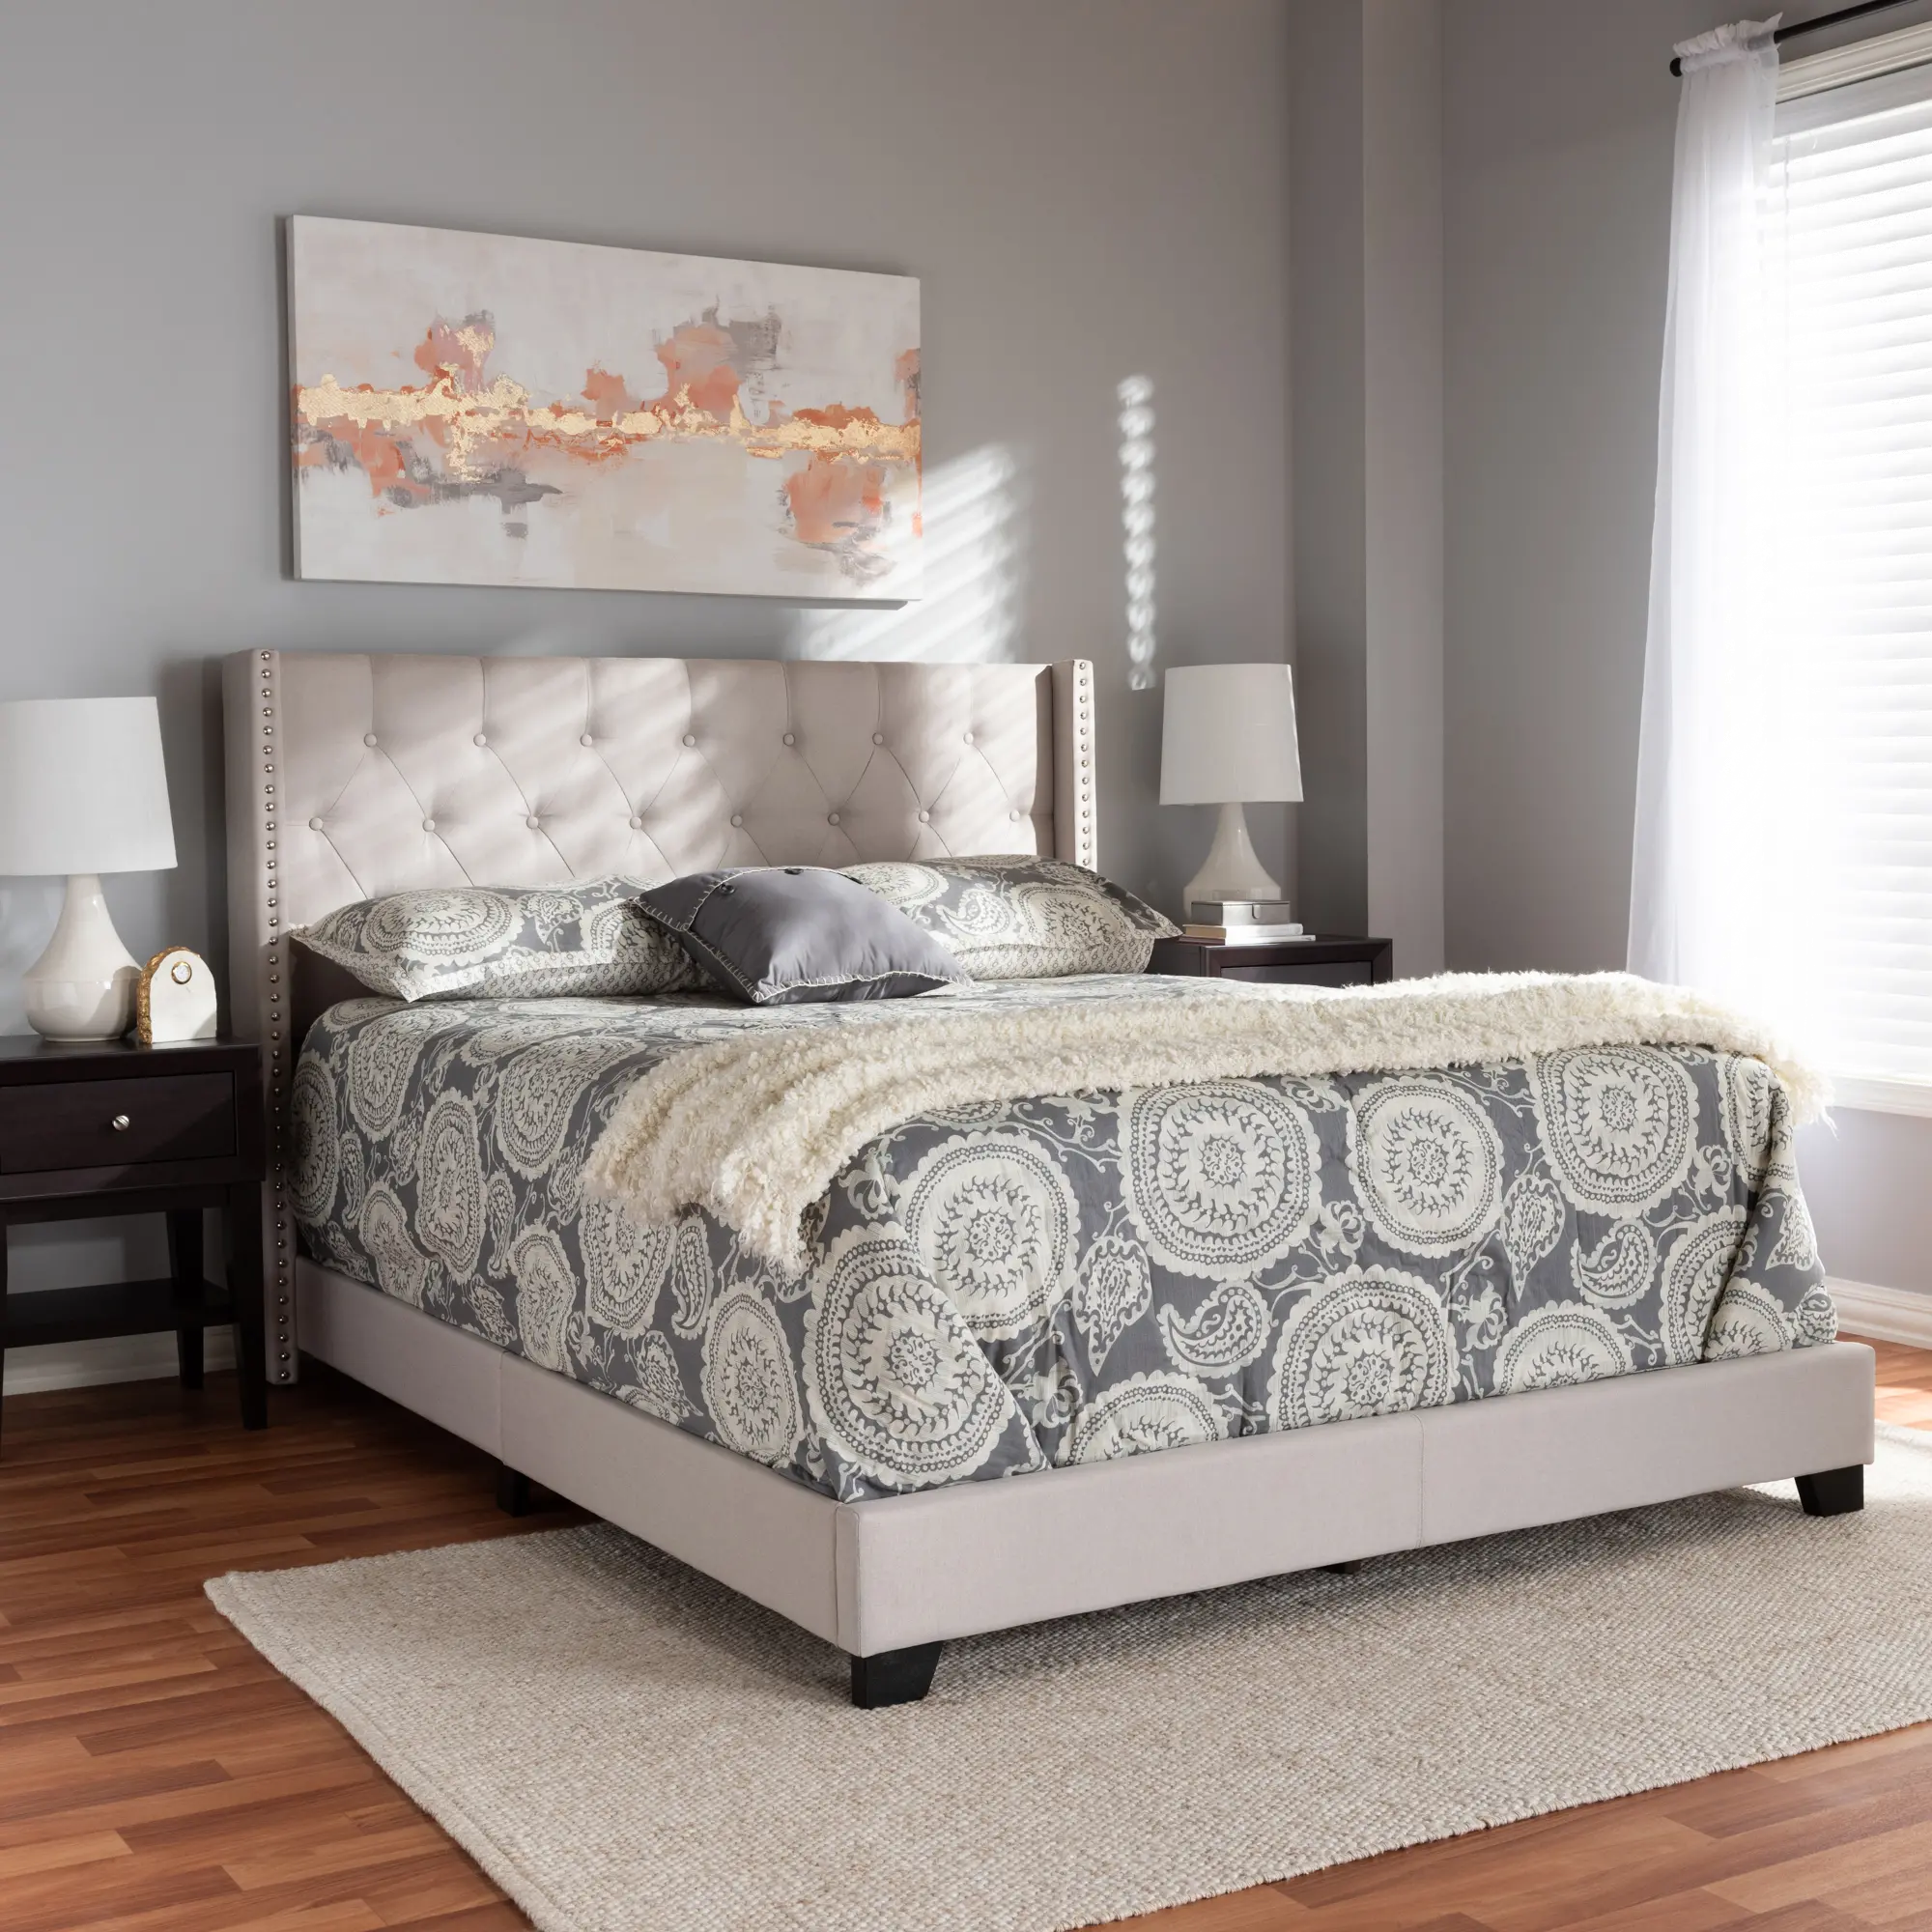 149-8944-RCW Contemporary Beige Upholstered Full Bed - Westley sku 149-8944-RCW